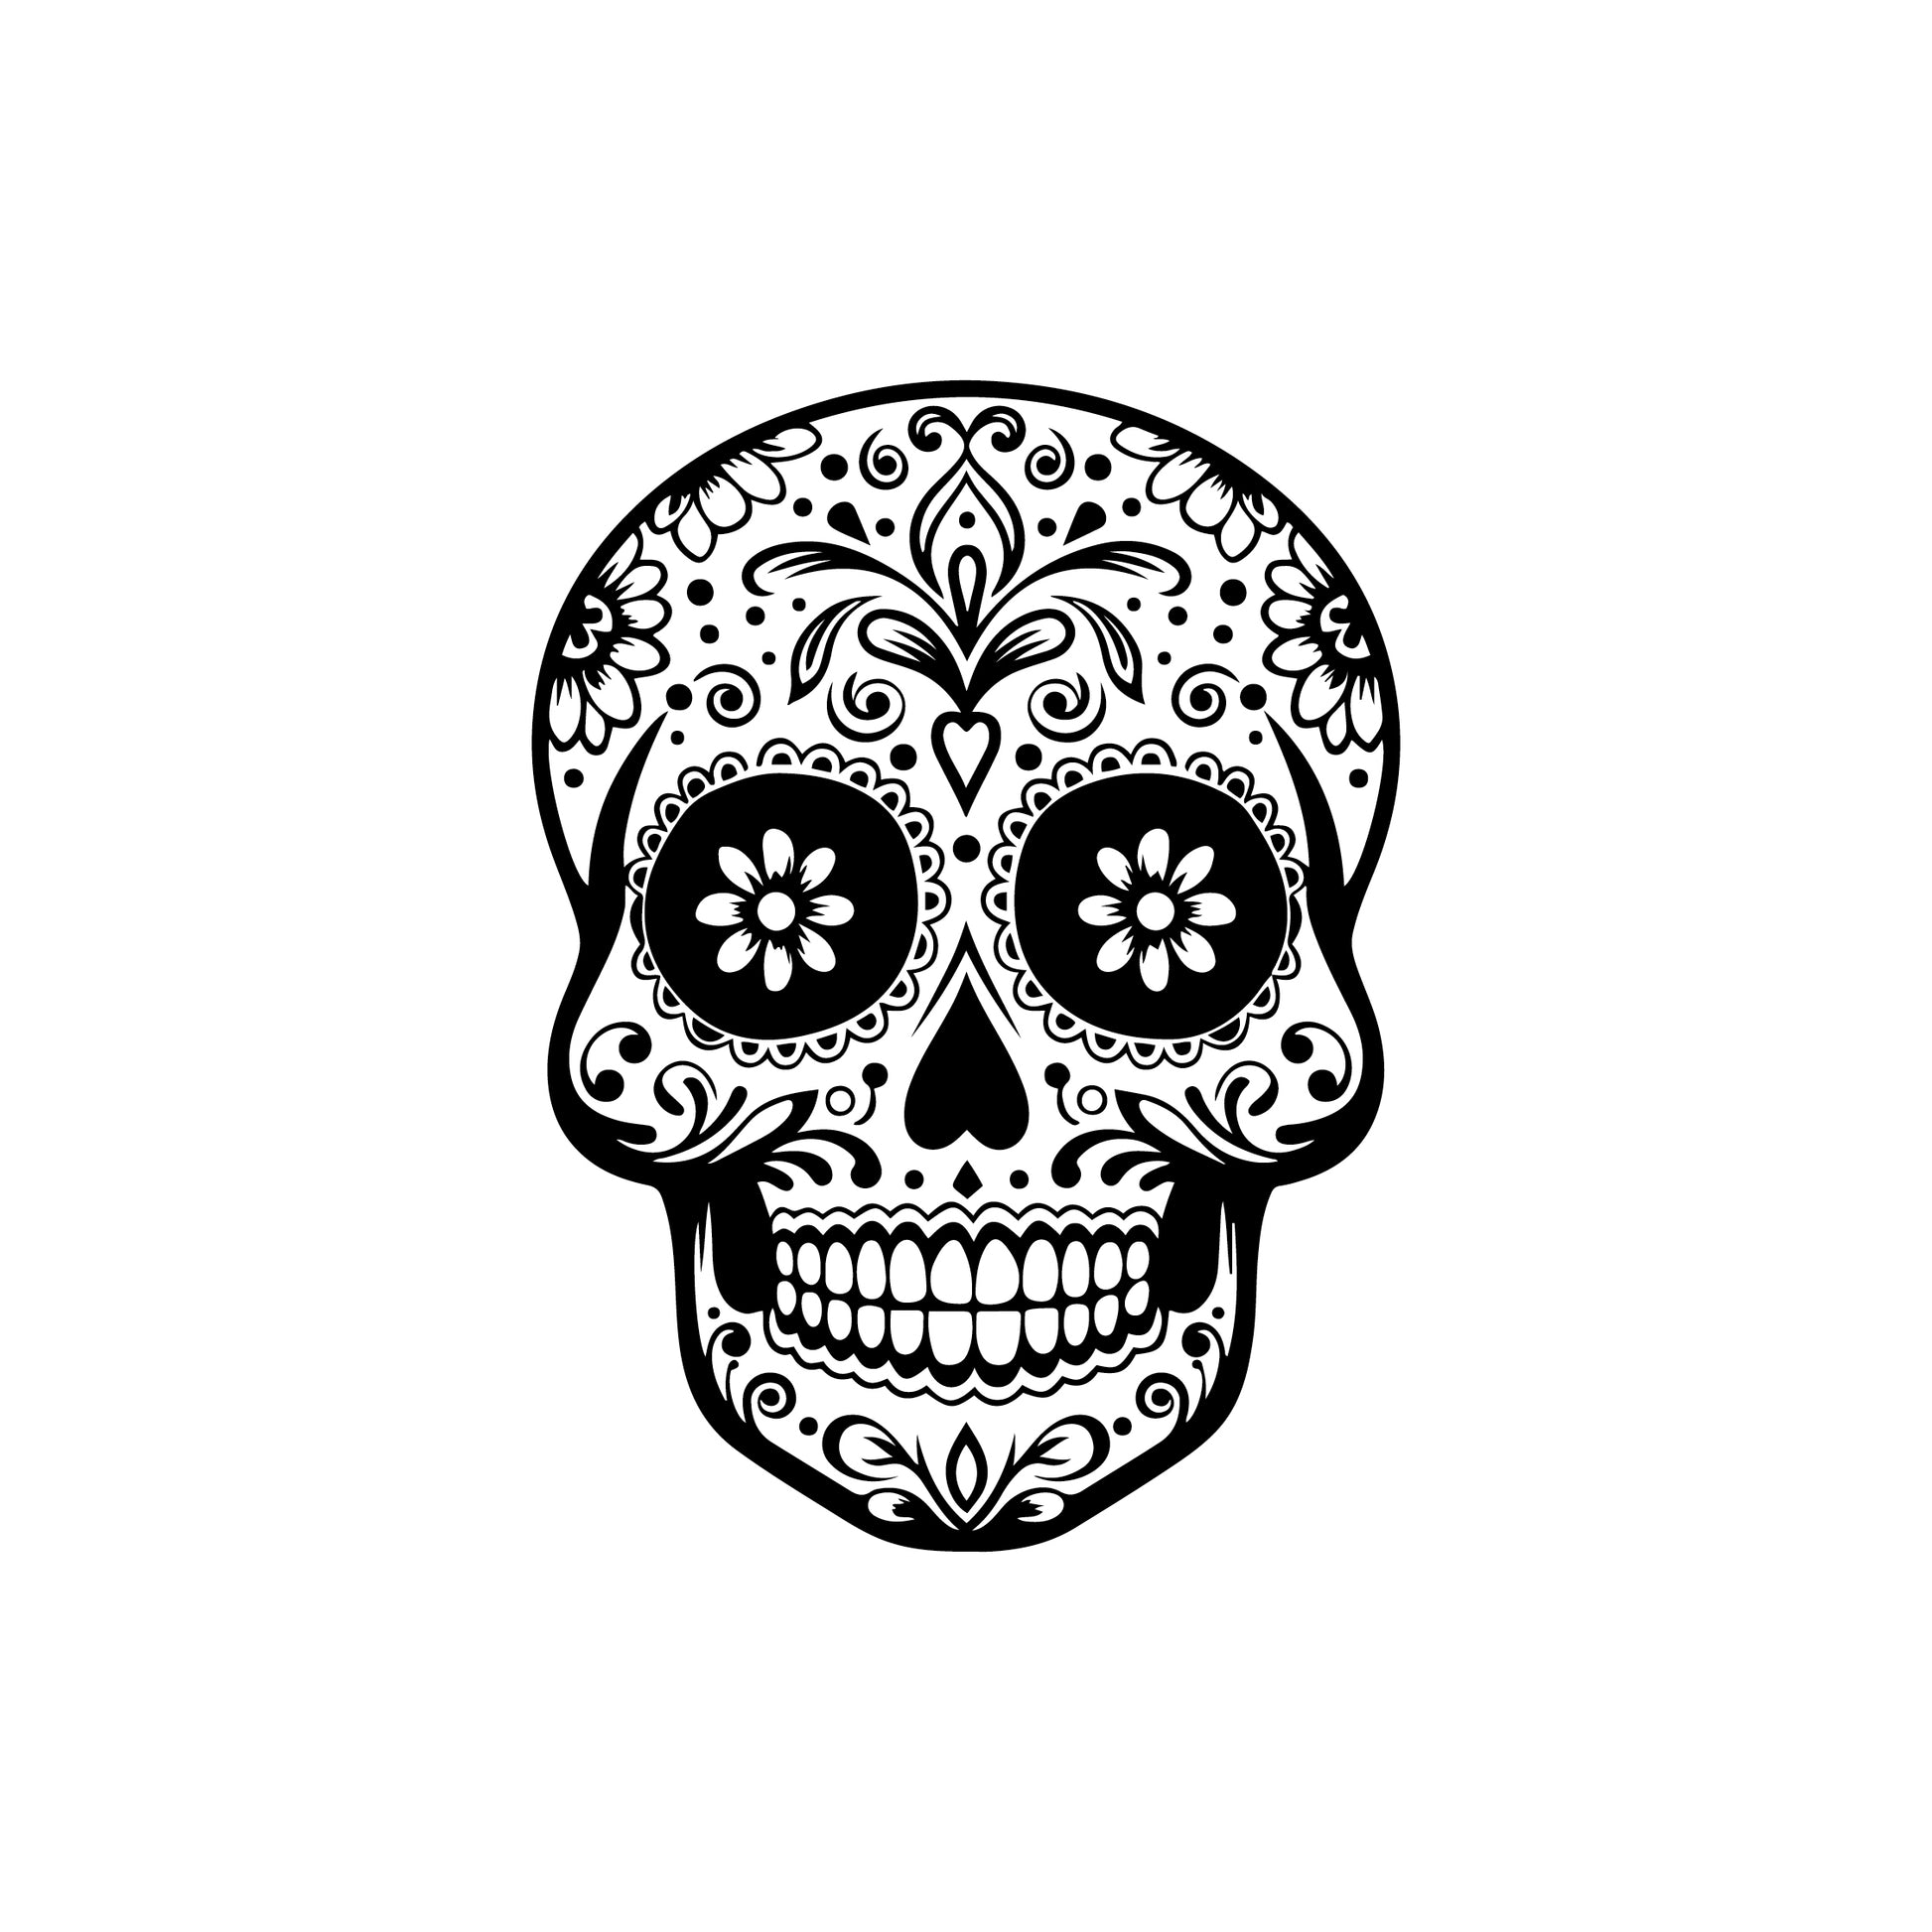 Day of the dead skull - Wall decal sticker